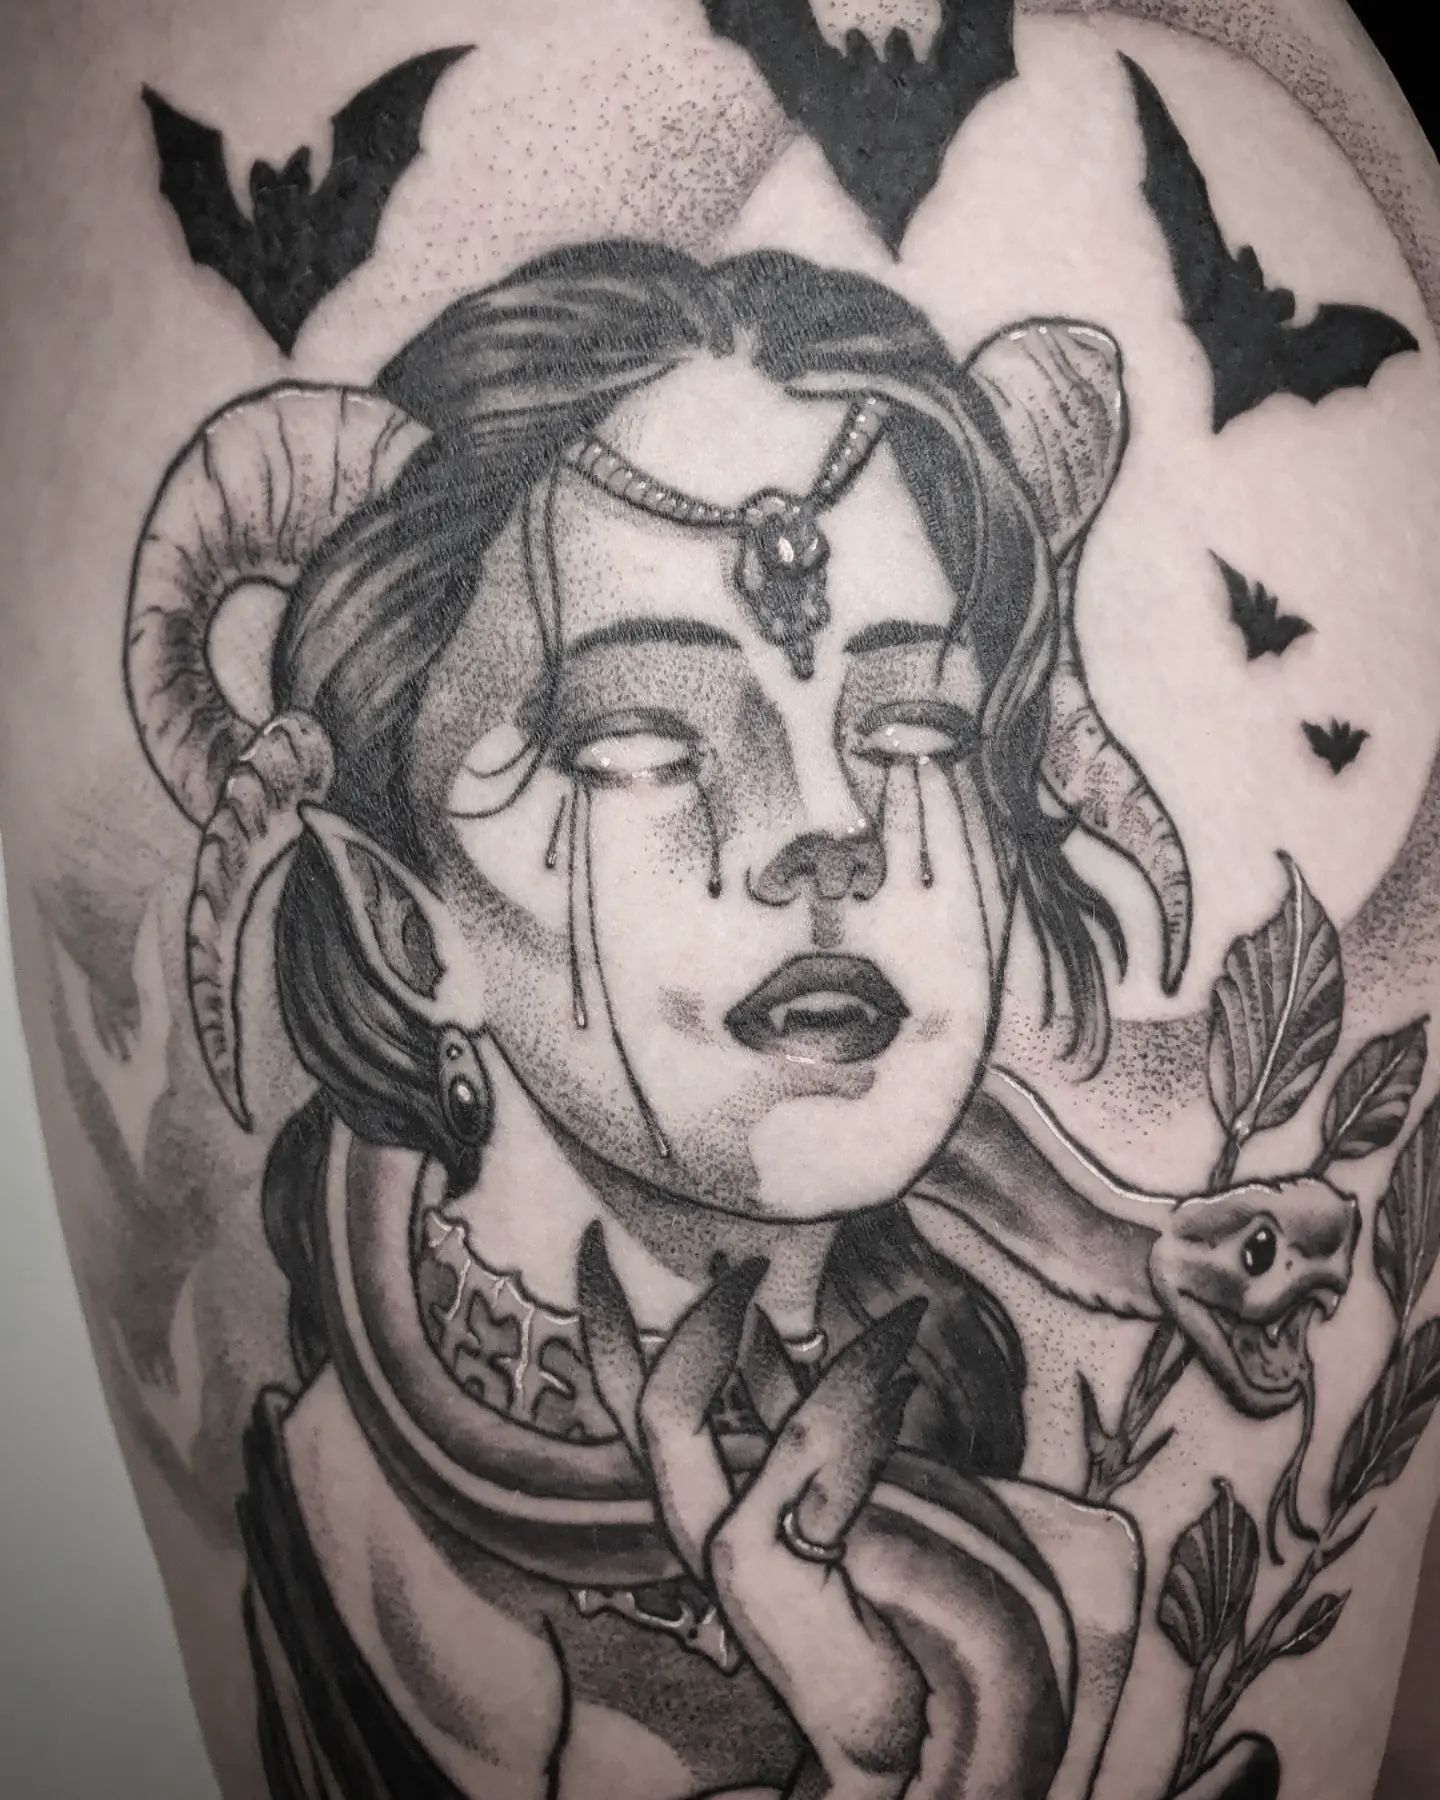 Finished this young lady today :)
.
#tattoo #darkartists #blackwork #demon #dark